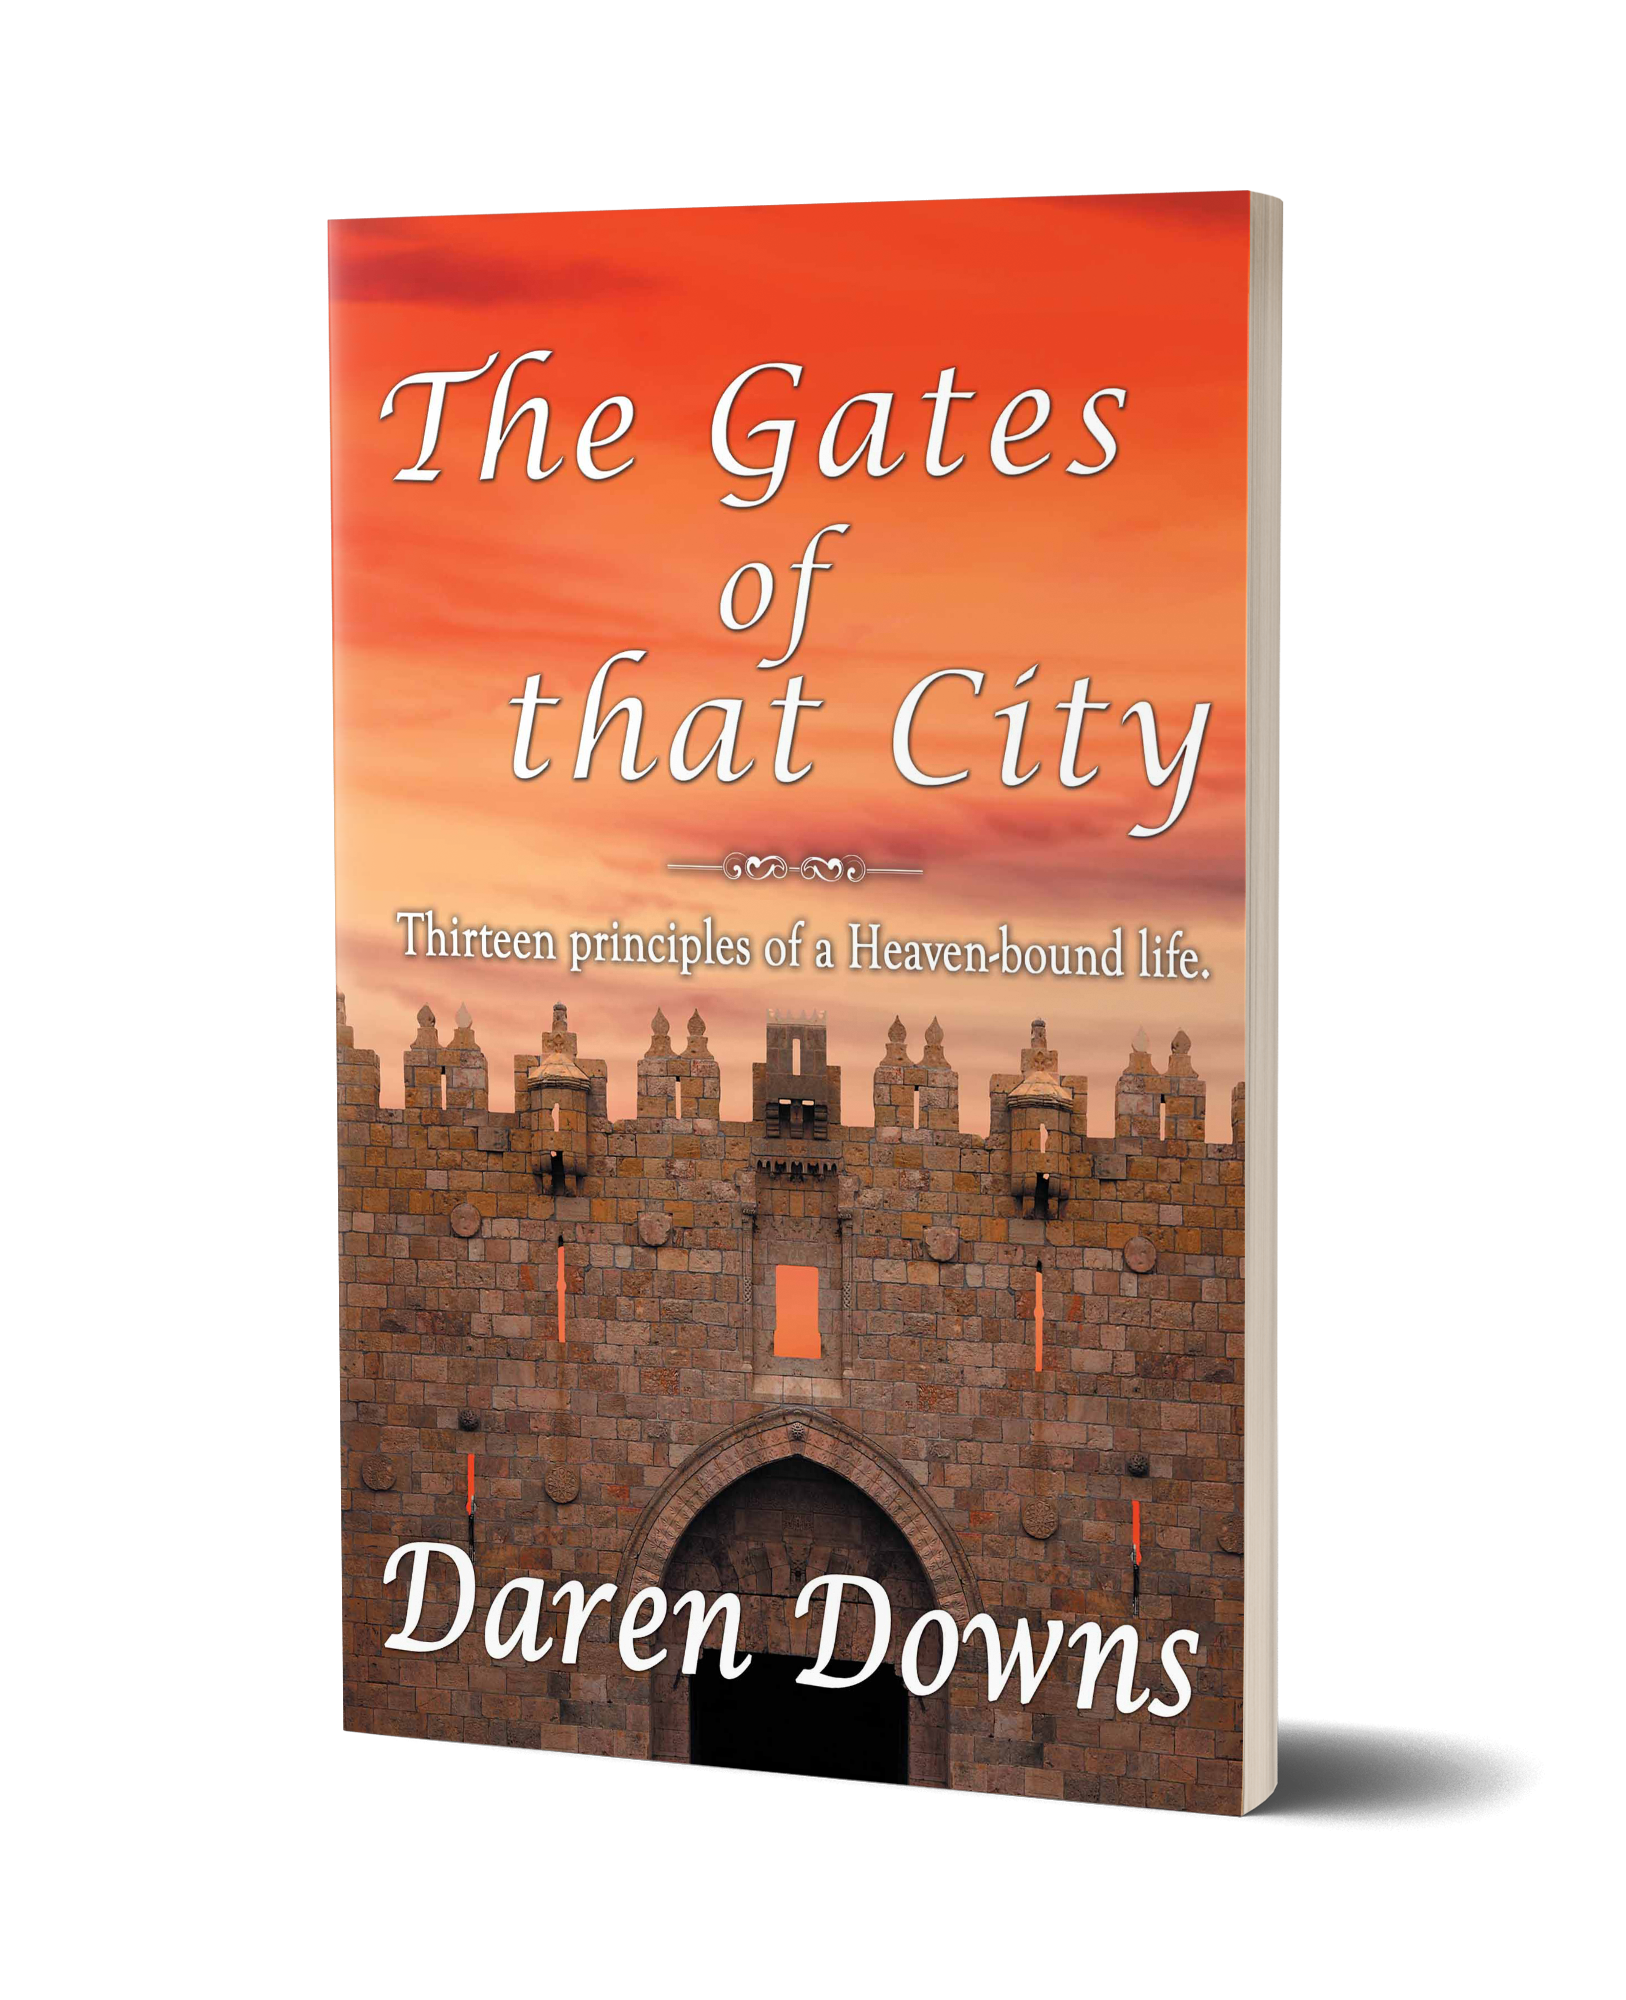 The Gates of that City by Daren Downs